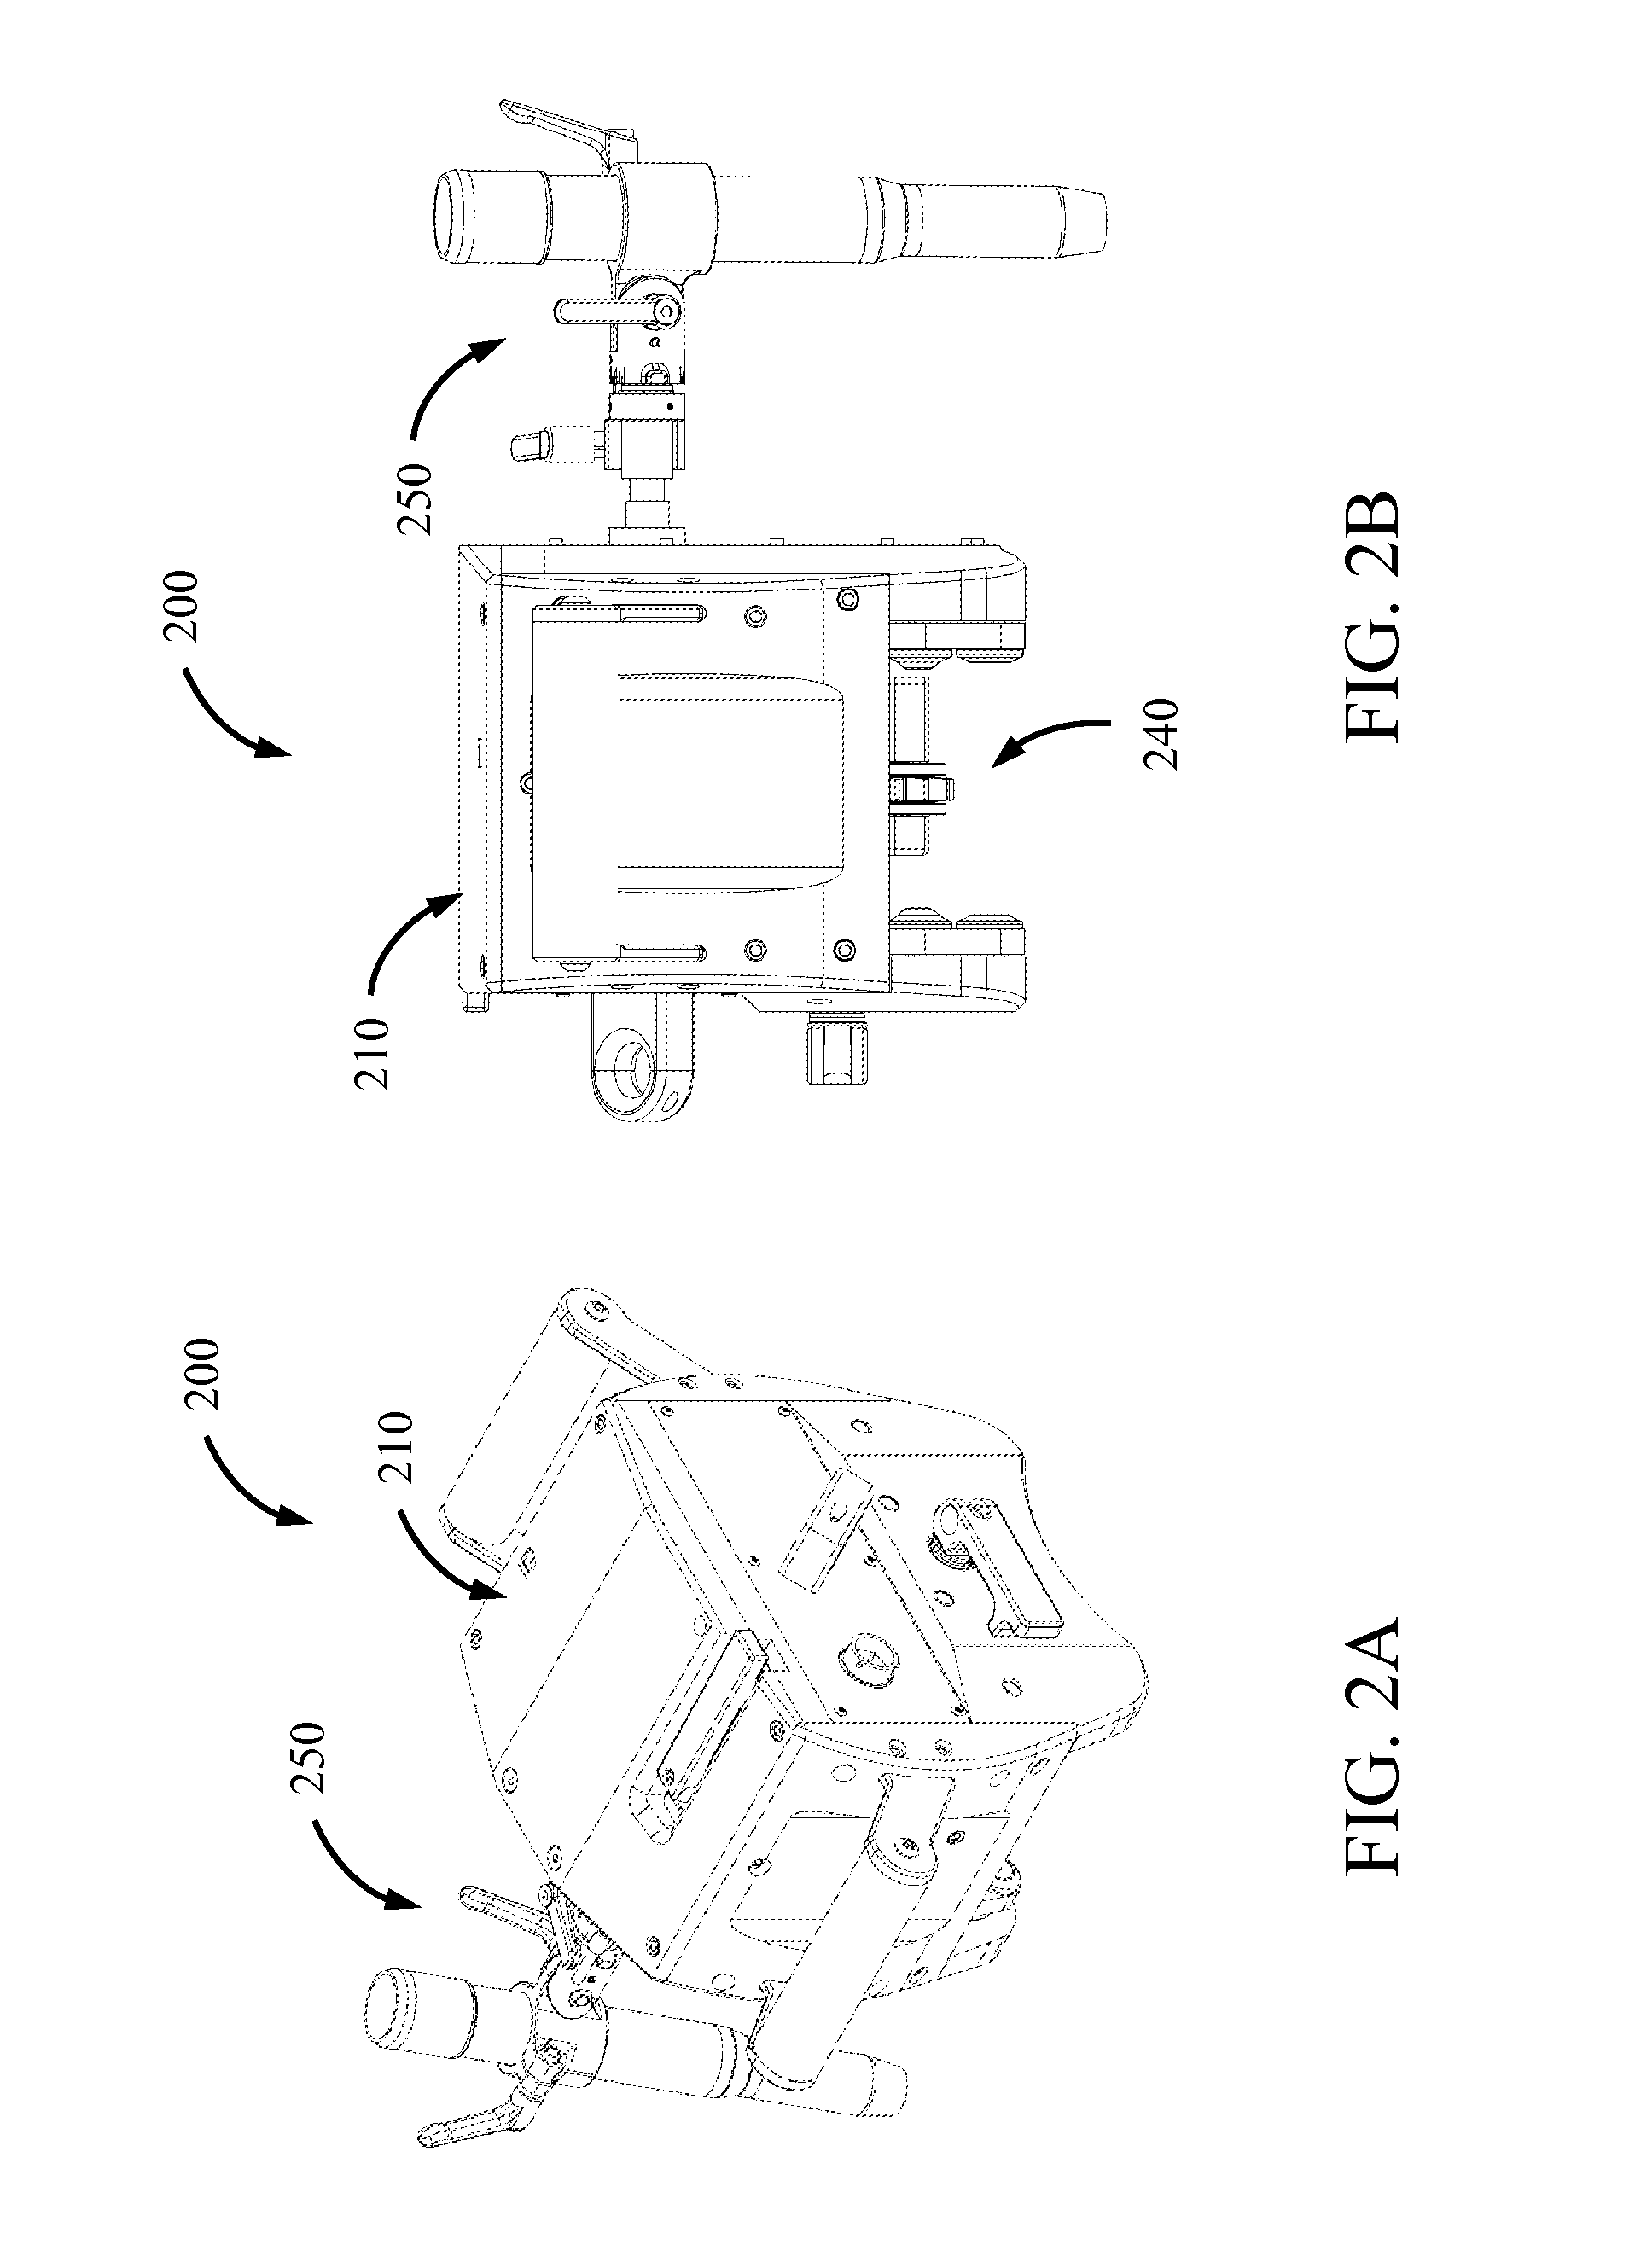 Orbital welding torch systems and methods with lead/lag angle stop